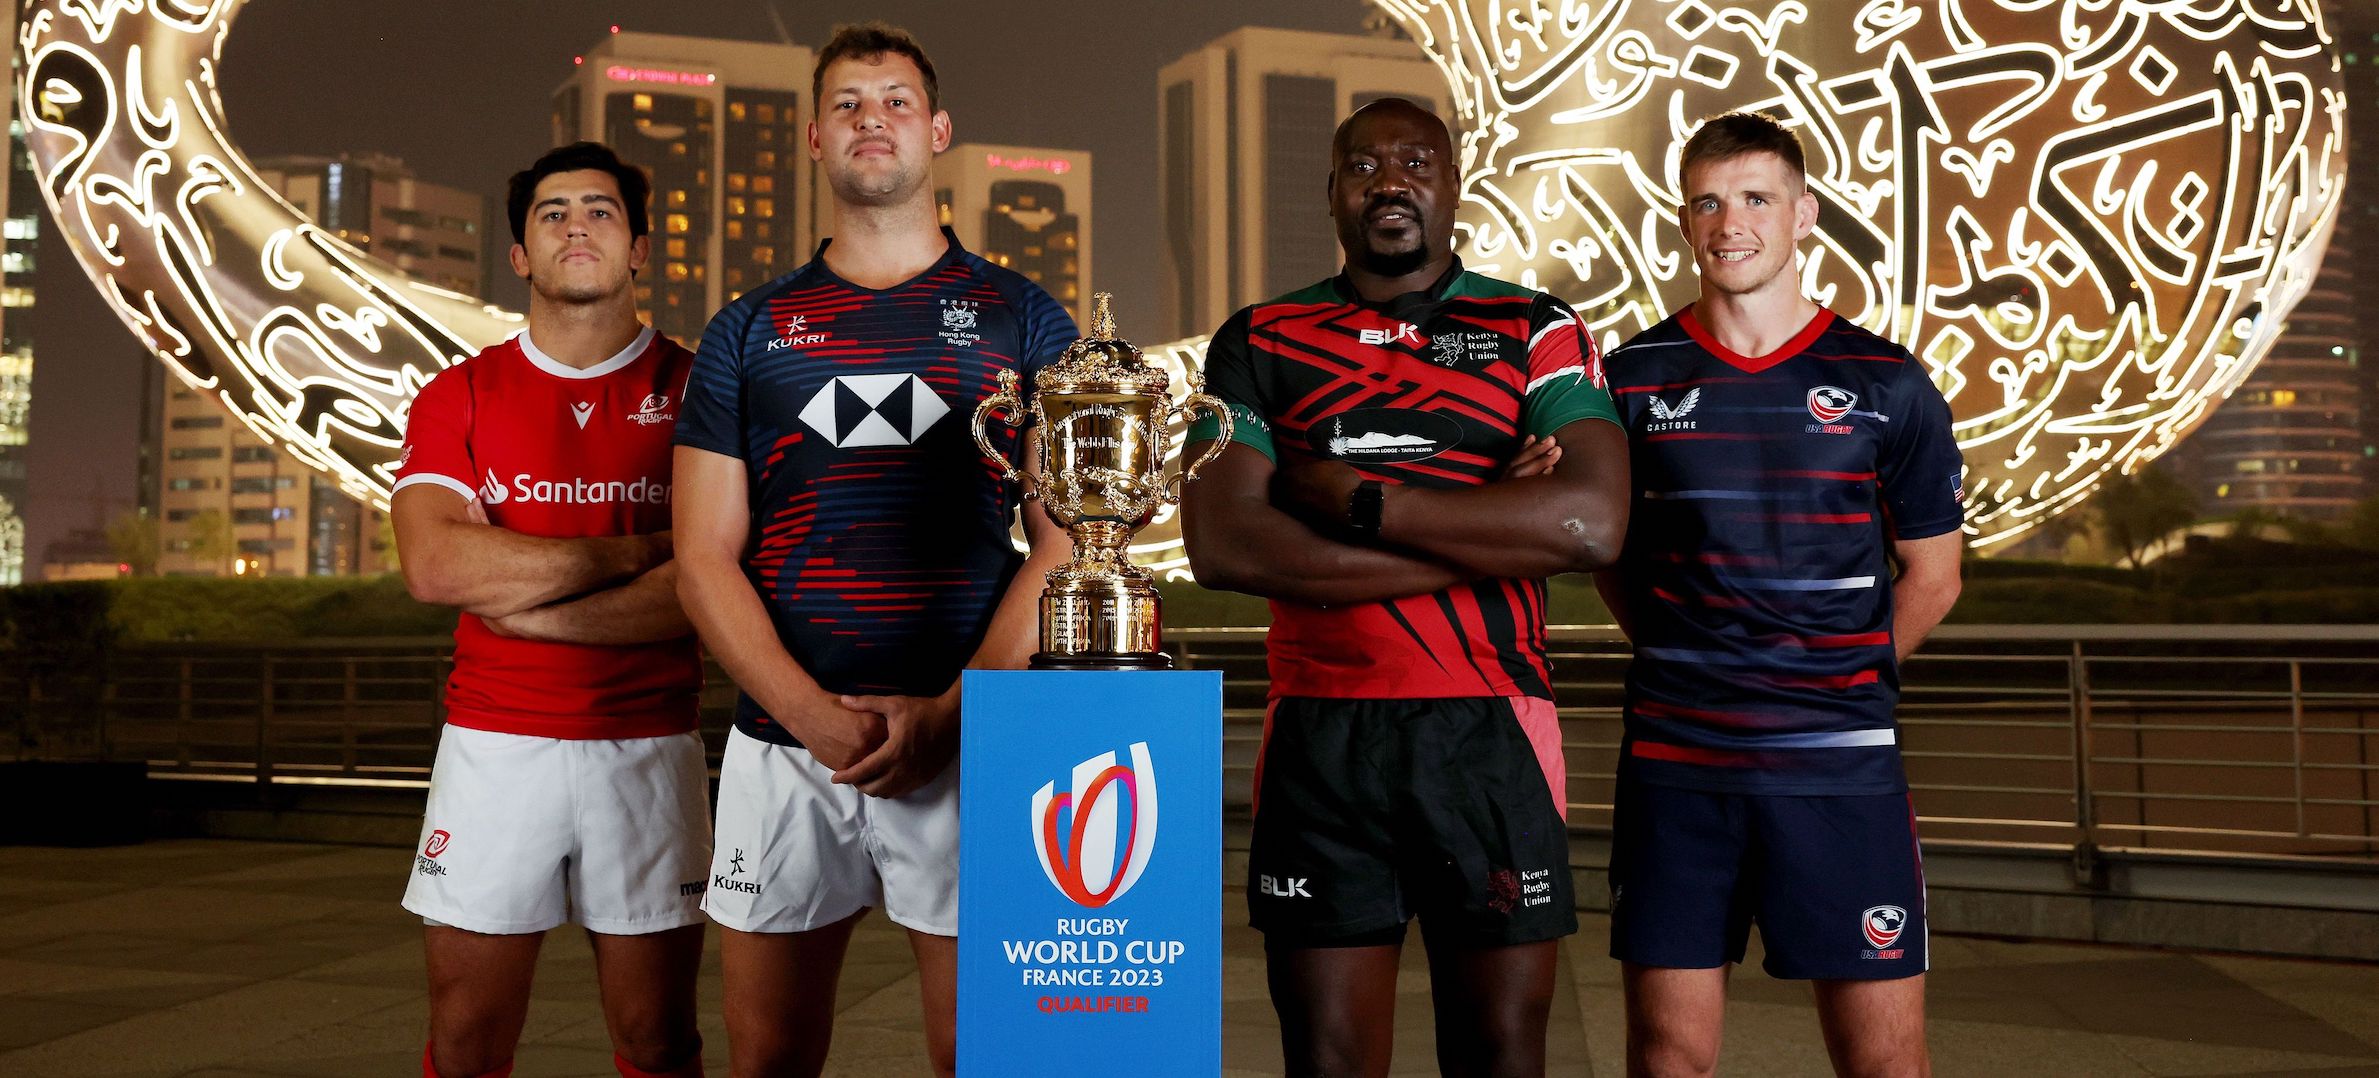 Final four assemble in dubai in pursuit of rugby world cup dream